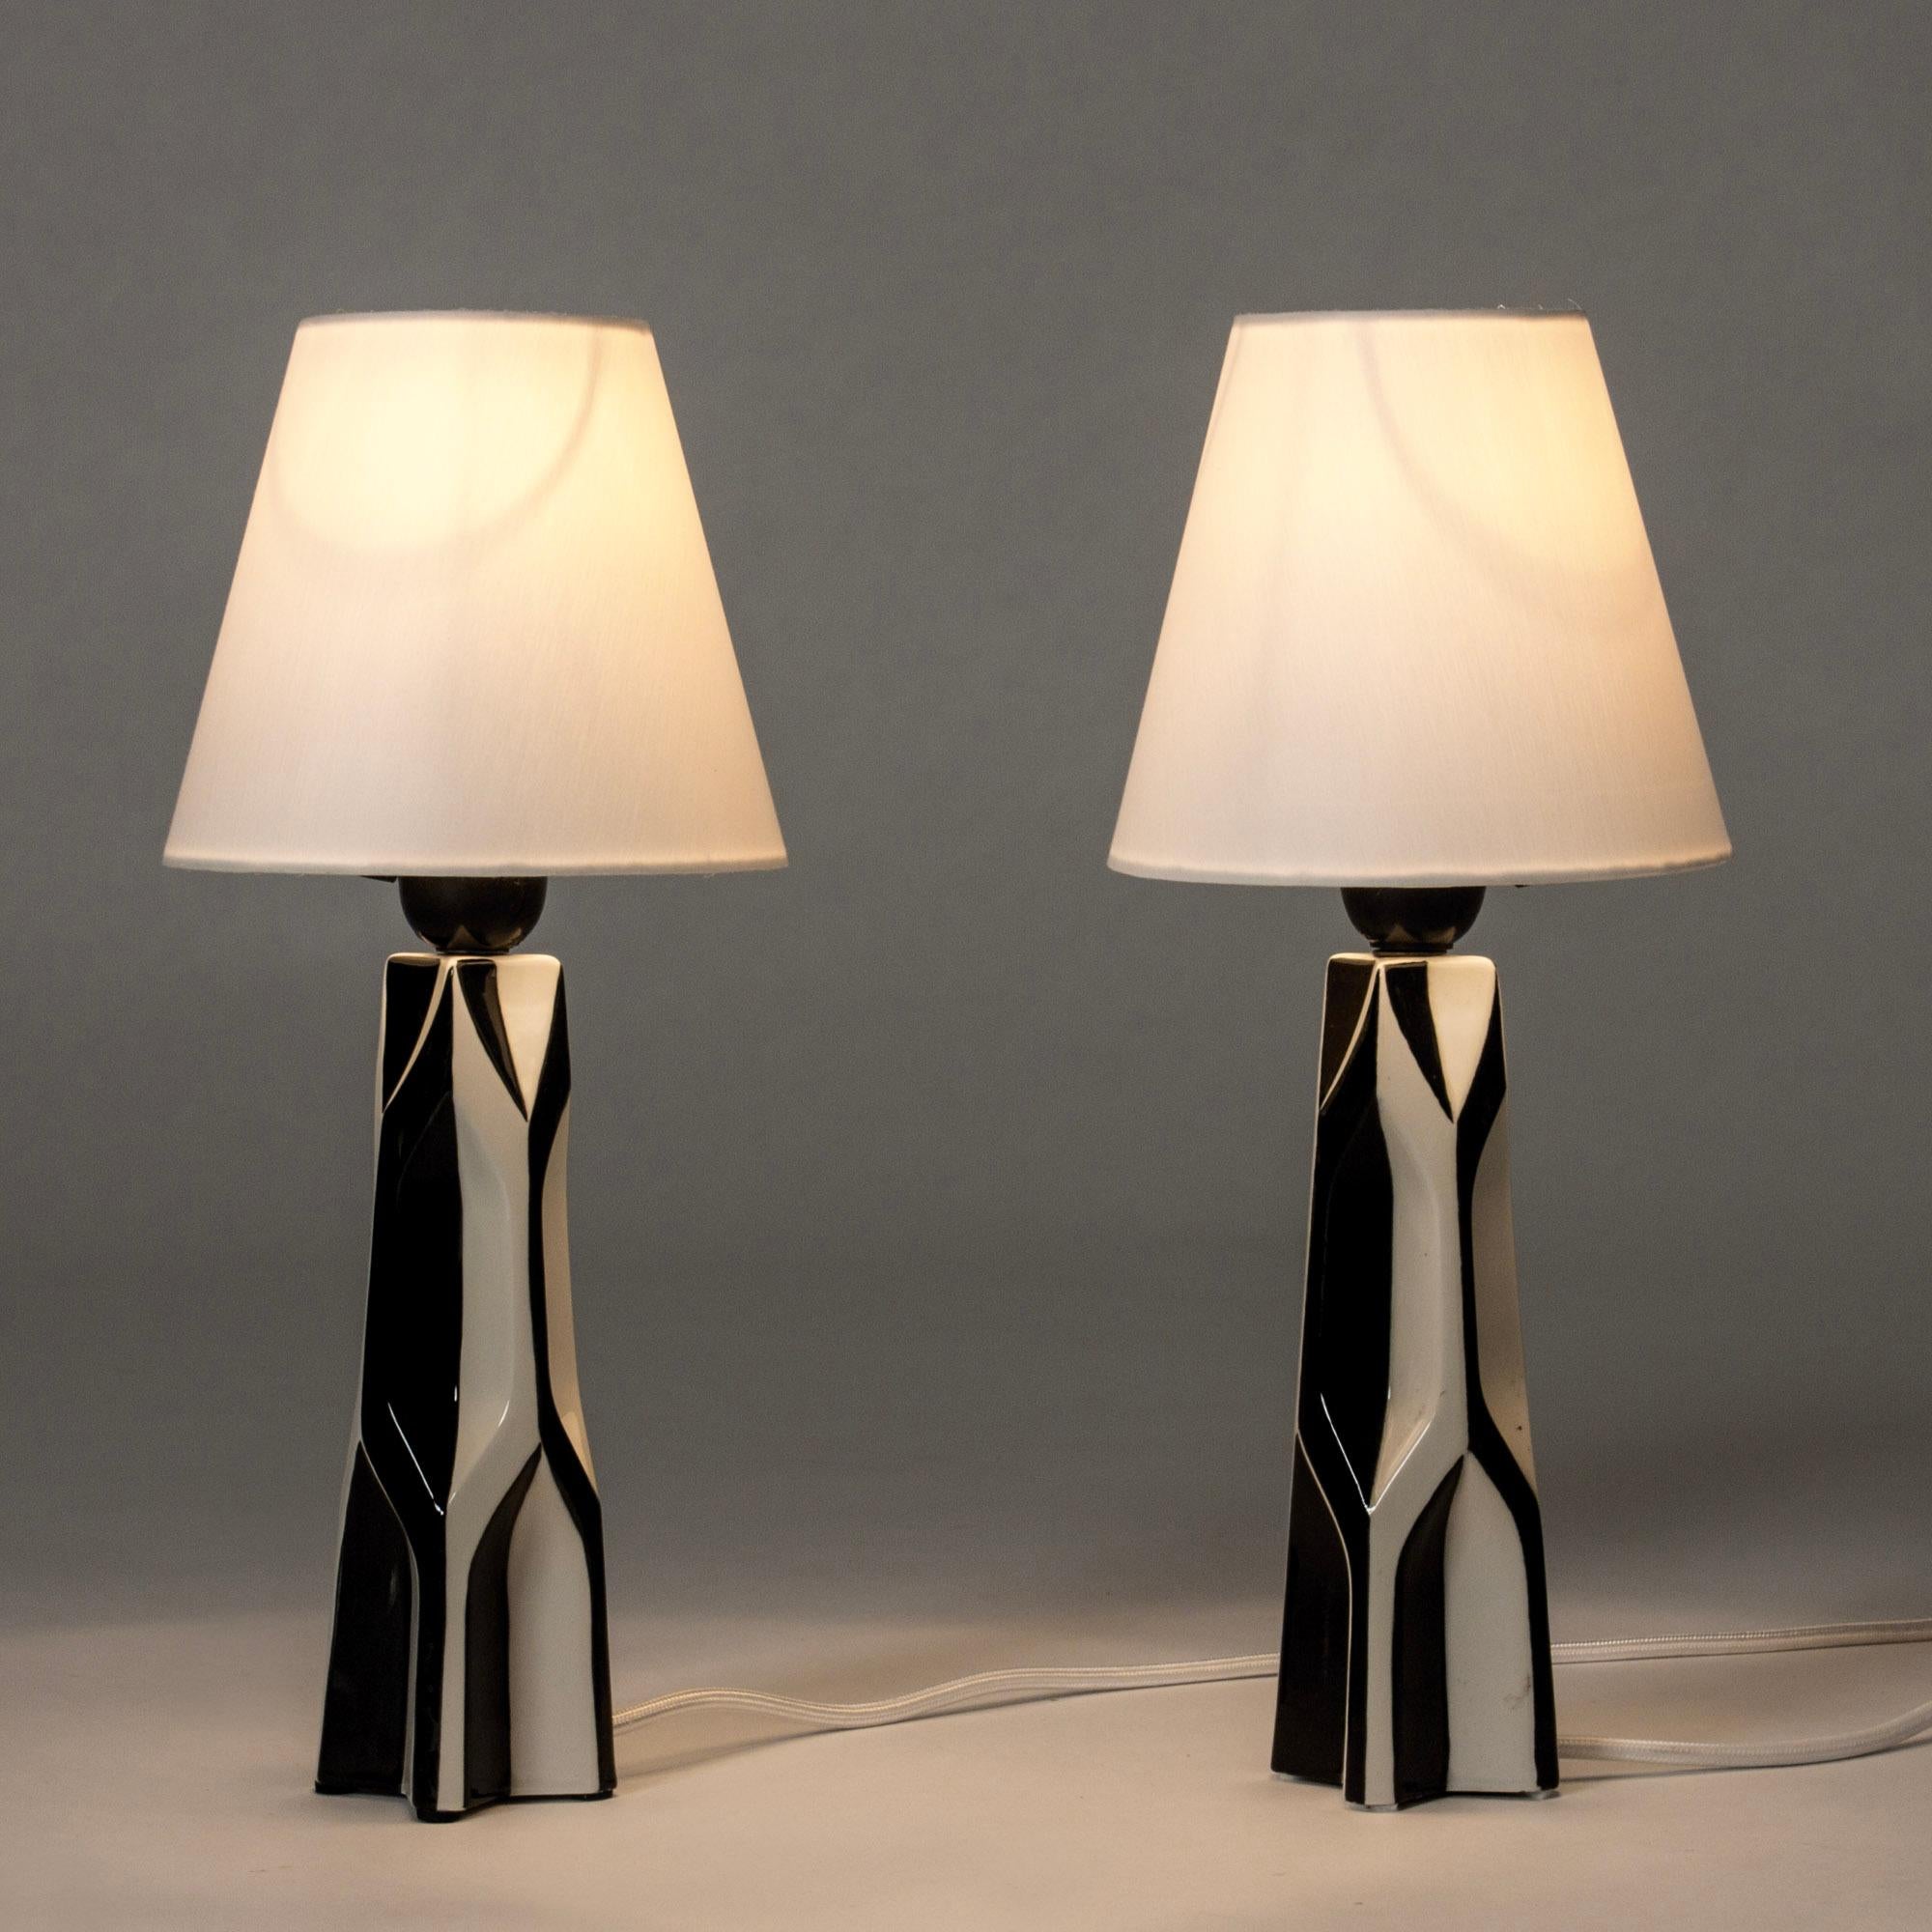 Striking pair of stoneware table lamps by Carl-Harry Stålhane. Sculptural design with graphic black and white decor.

Carl-Harry Stålhane was one of the stars among Swedish ceramic artists during the 1950s, 1960s and 1970s, whose designs are just as